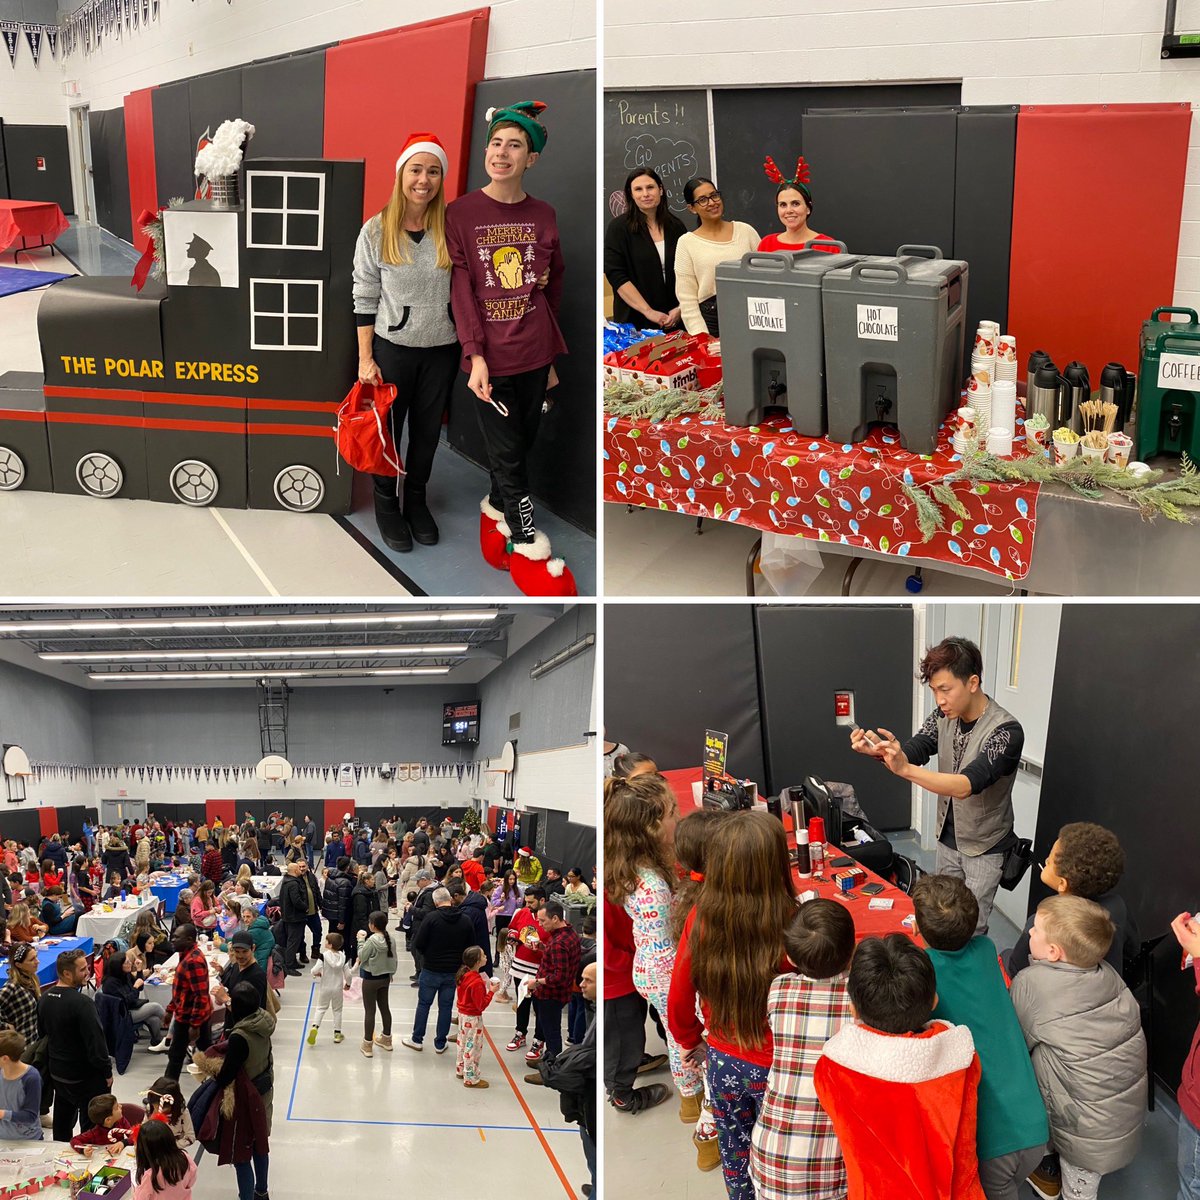 All Aboard the Polar Express 🚂 Thank you LOC CSC for hosting a magical community event! @YCDSB @DomenicScuglia @ElizabethCrowe_